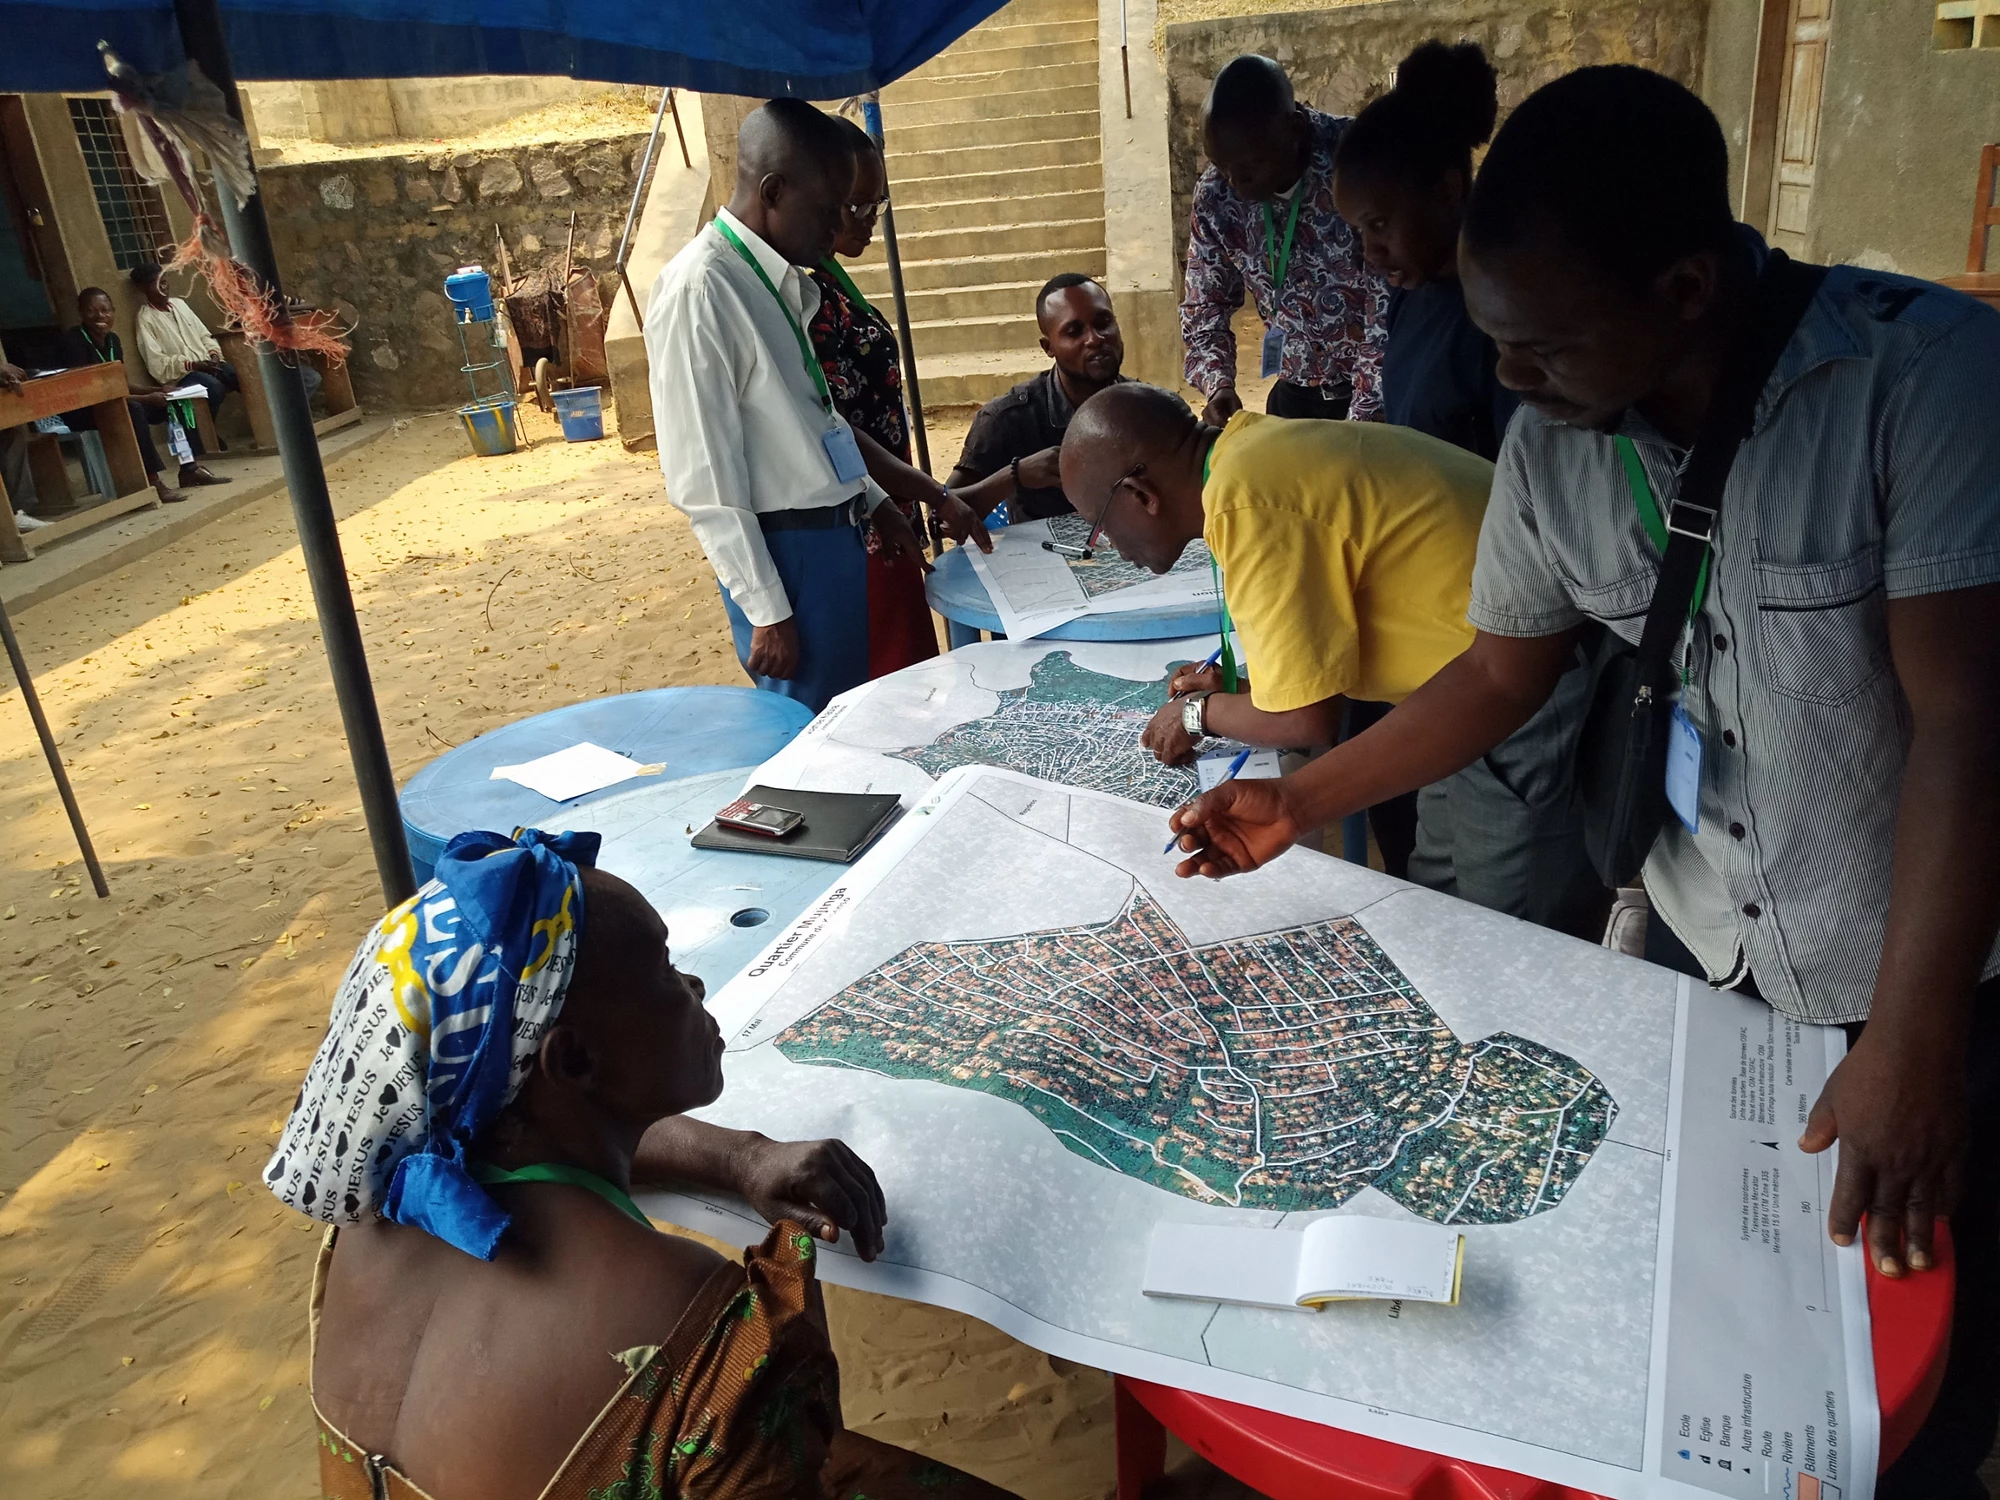 Members of the mapping community in Kinshasa plan the collection of field data for the Kisenso neighborhood. (courtesy of OpenDRI)